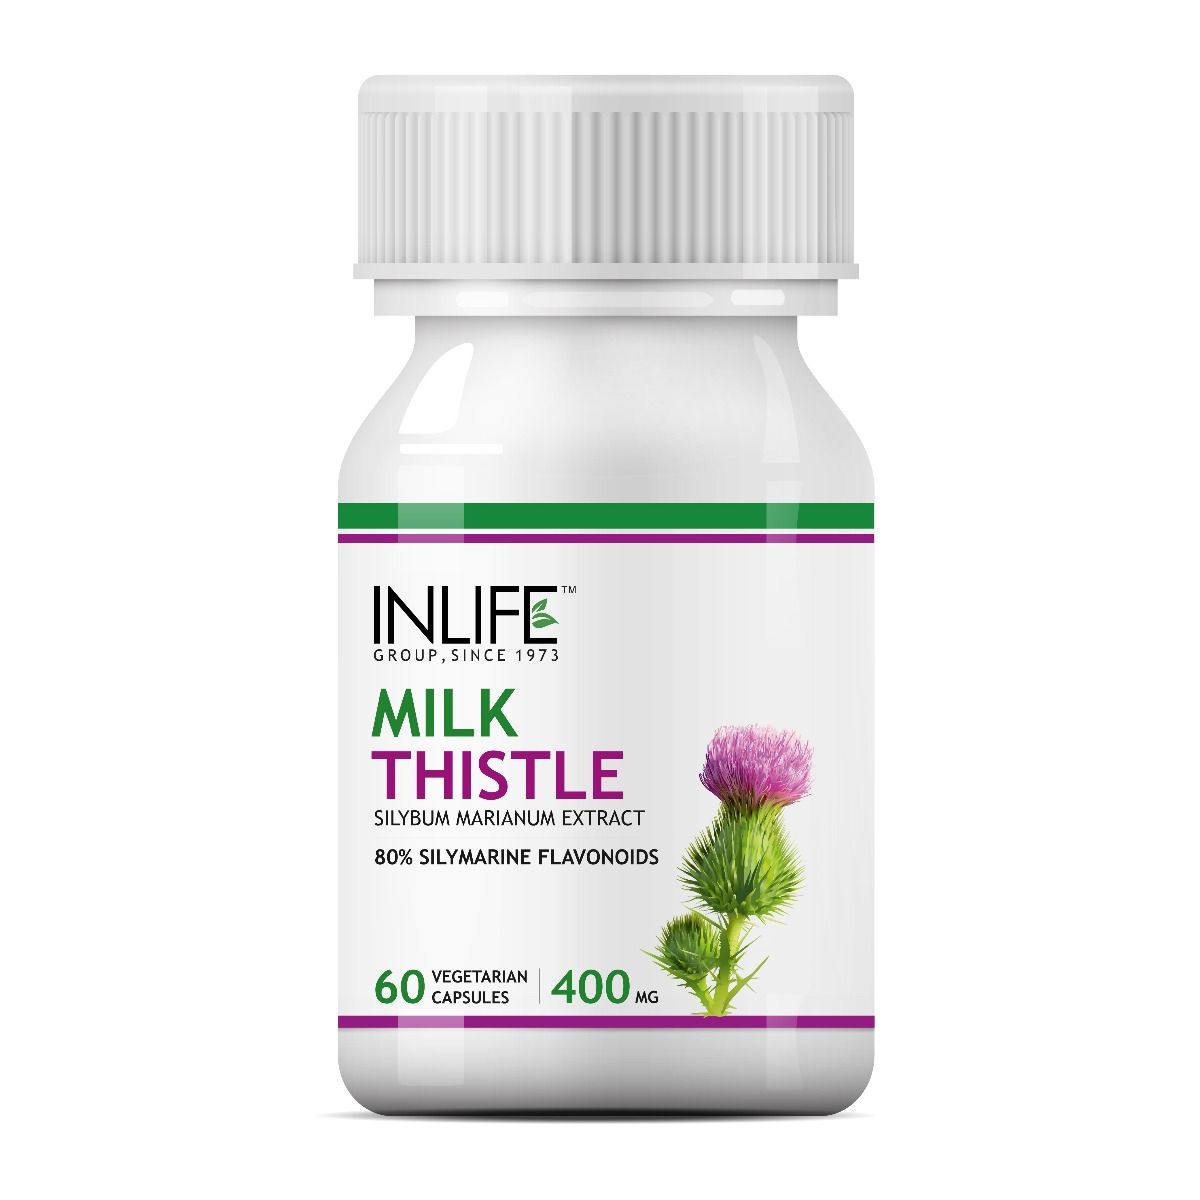 Inlife Milk Thistle 400 mg, 60 Capsules, Pack of 1 